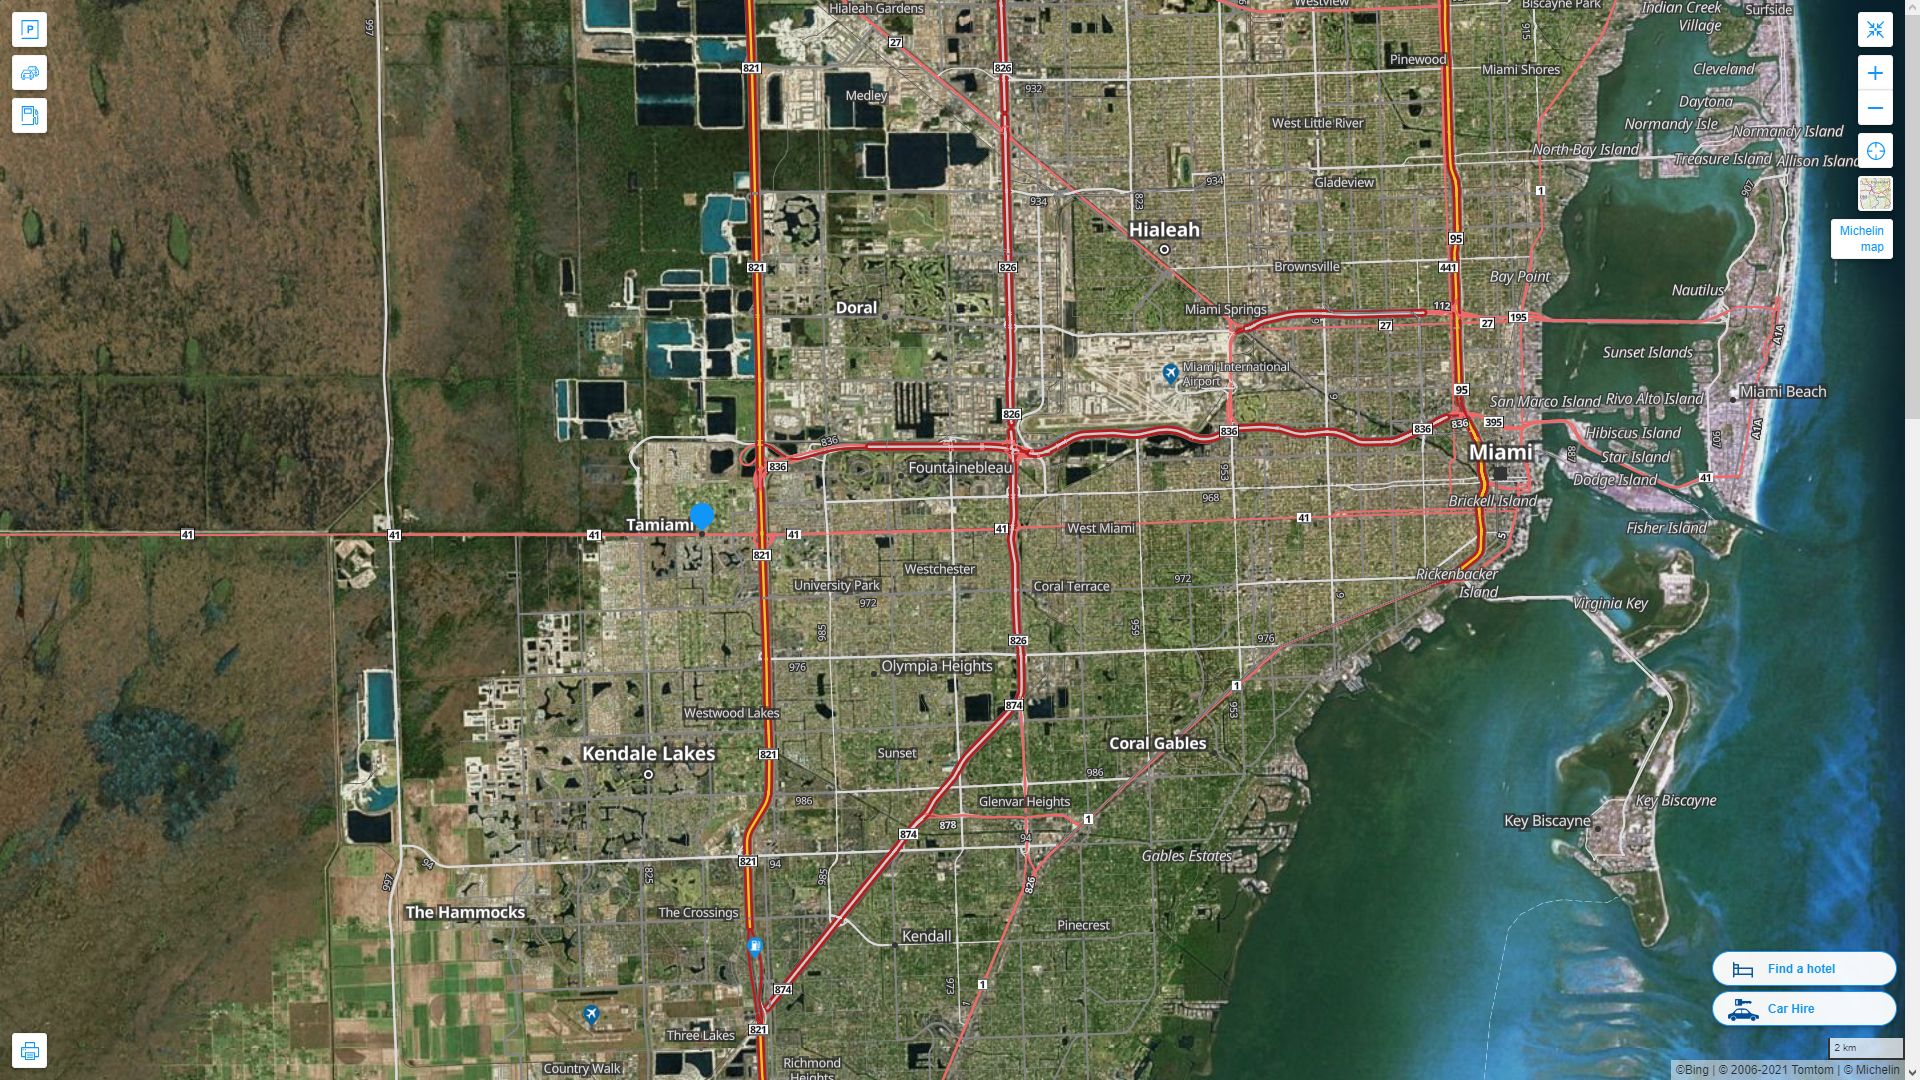 Tamiami Florida Highway and Road Map with Satellite View